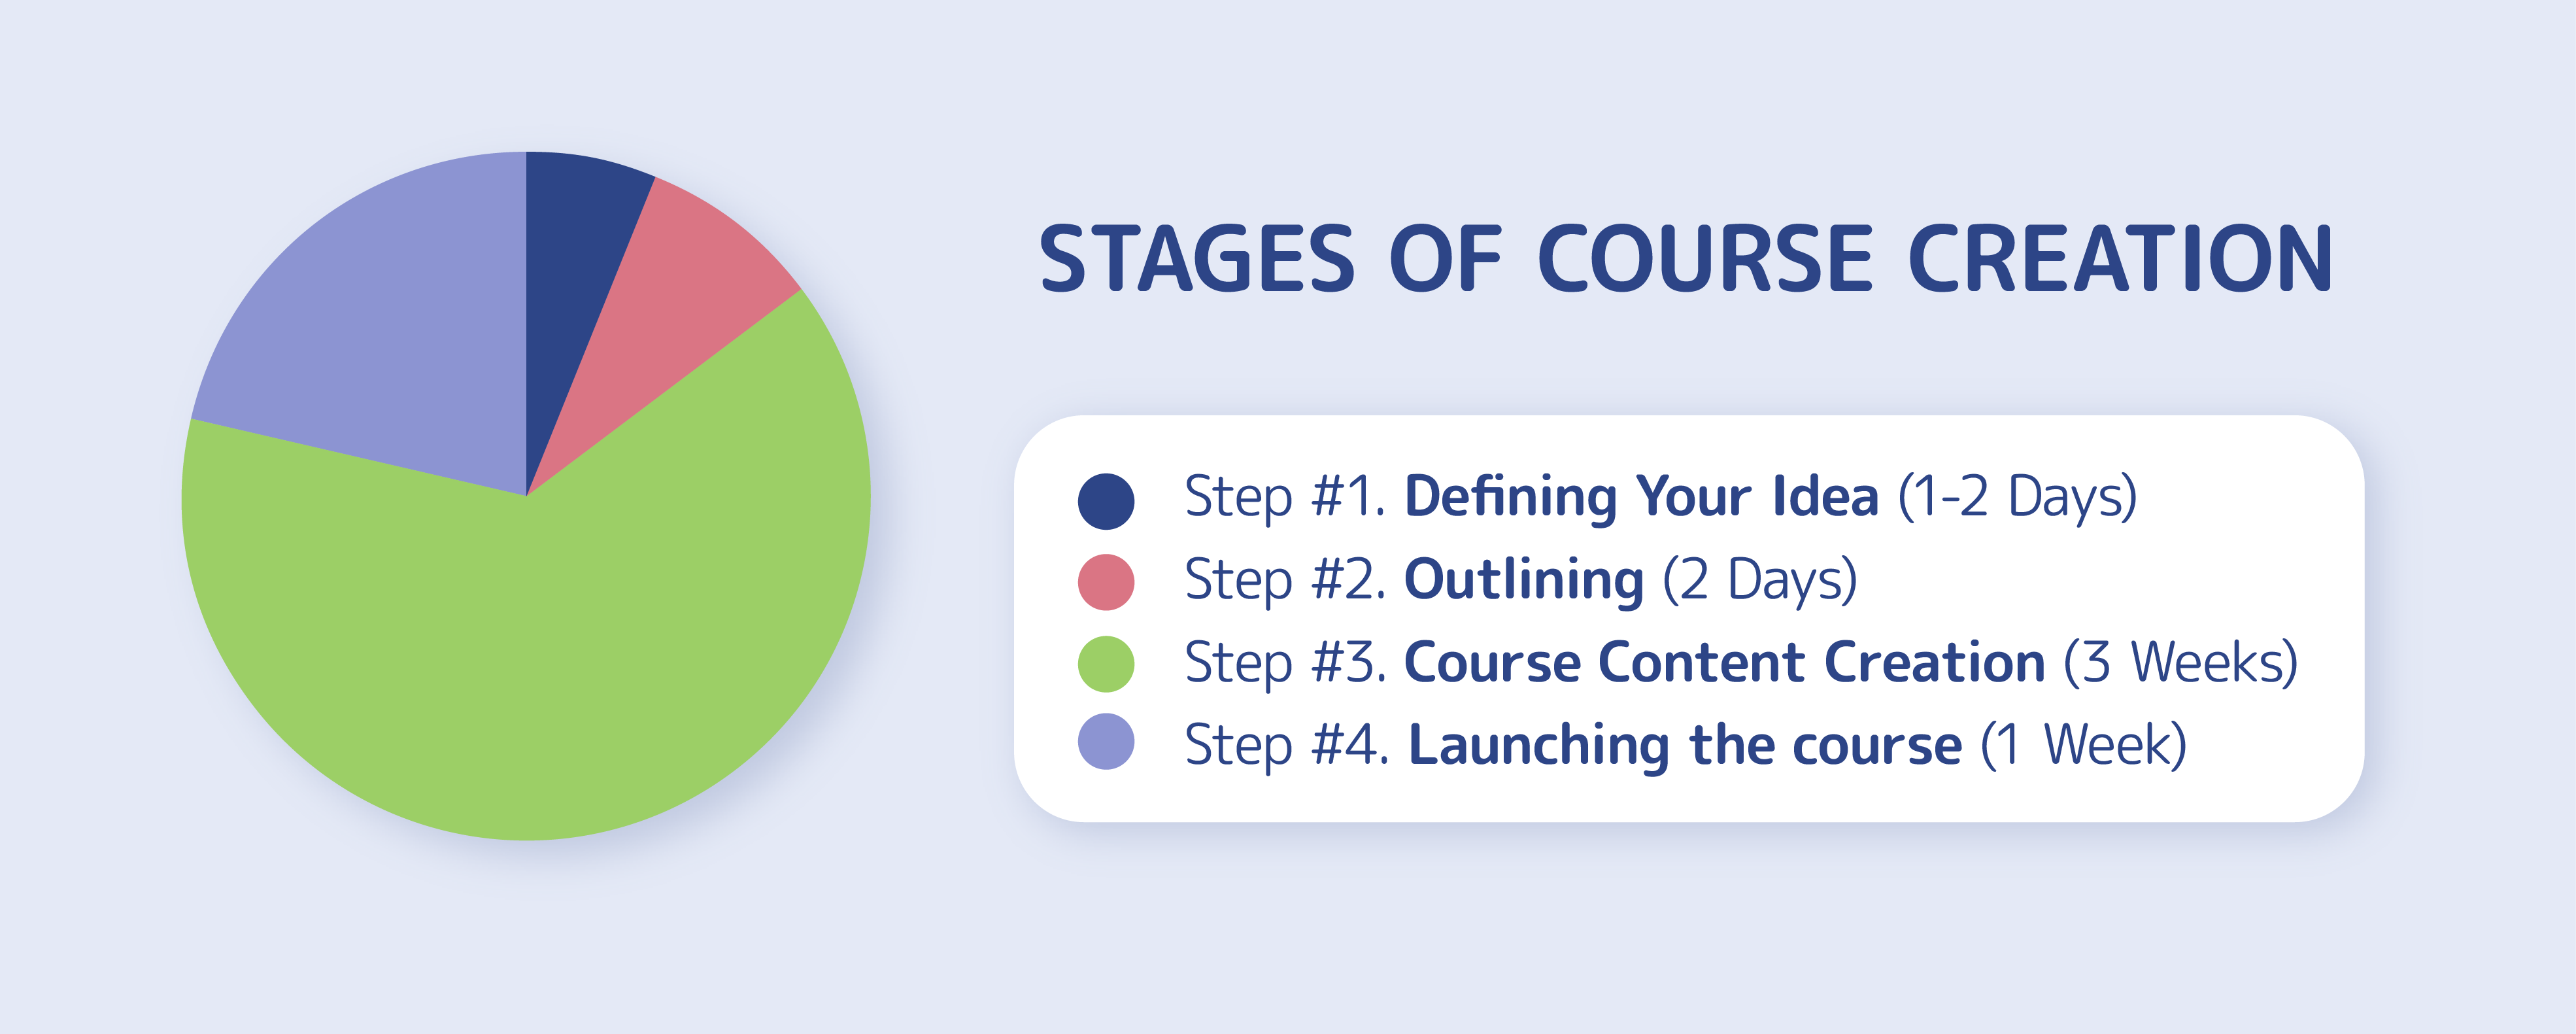 How long it takes to create an online course